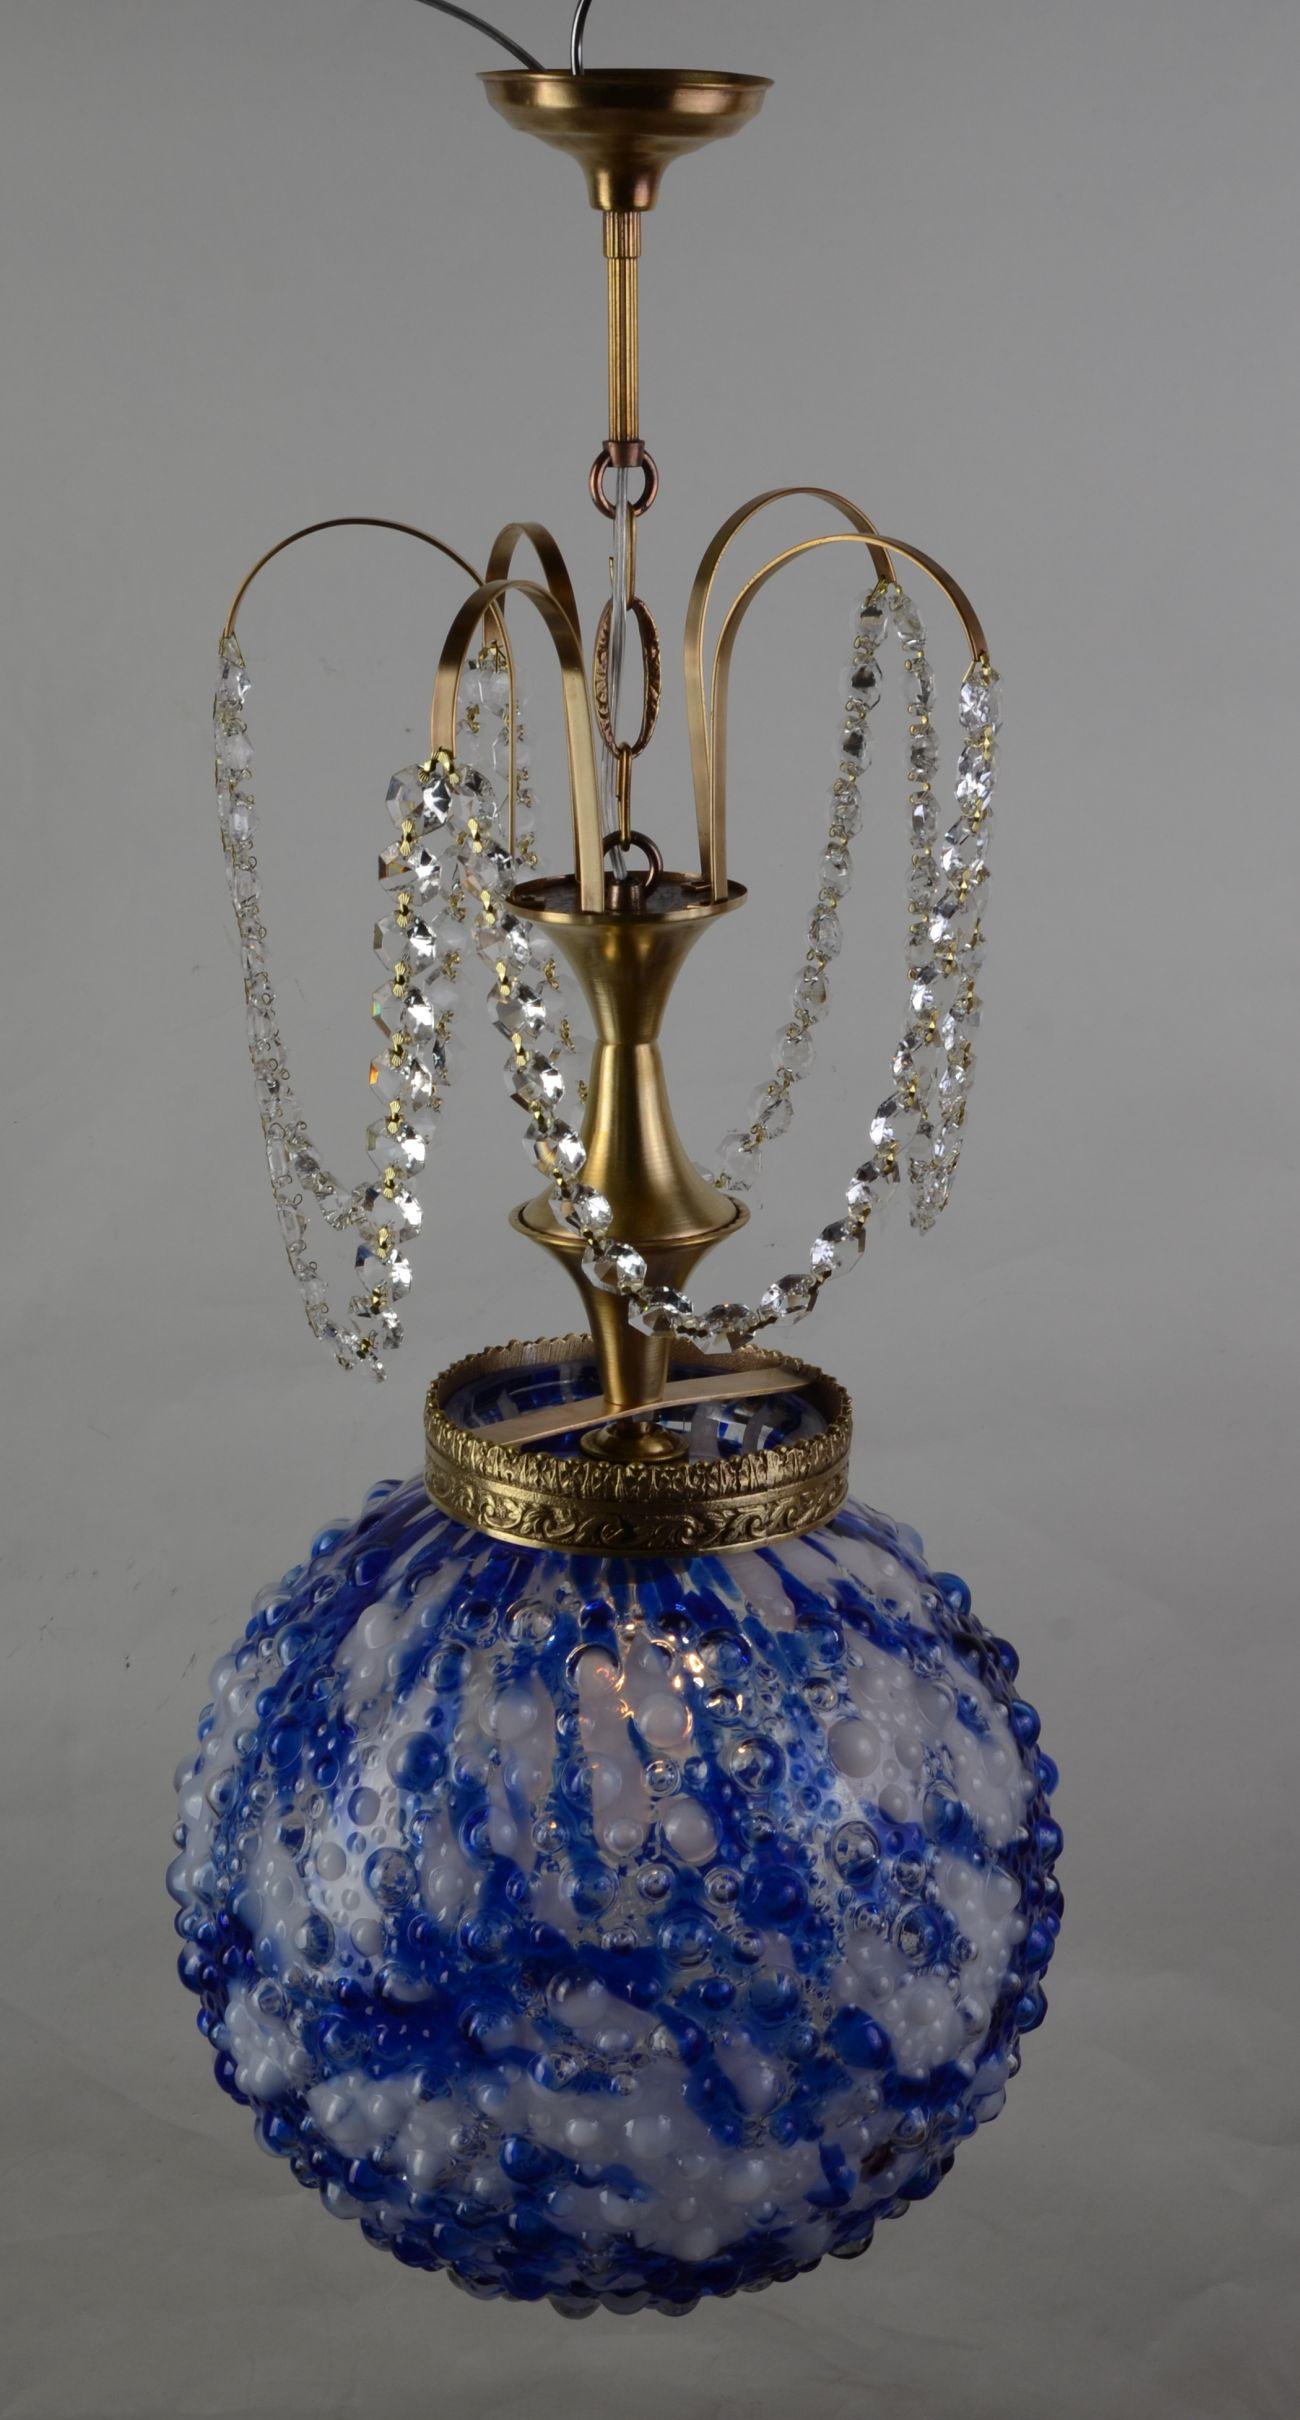 1950s Brass Ceiling Lamp with Original Murano Glass Lampshade, Spain 2